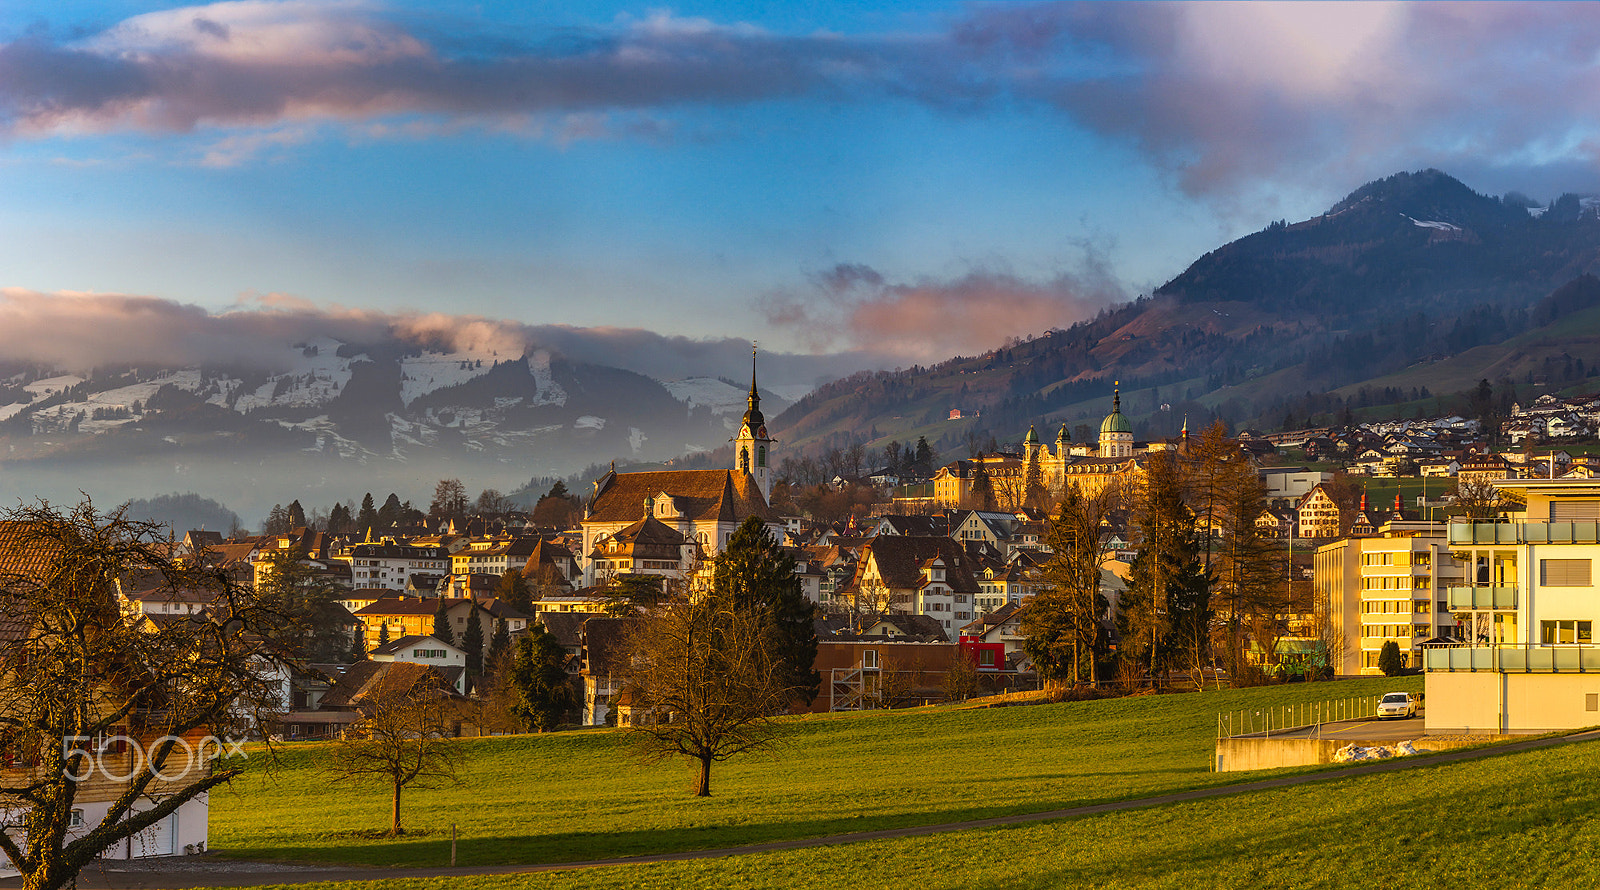 Sony a99 II sample photo. Colorful sunset in schwyz. switzerland. wide-angle hd-quality pa photography